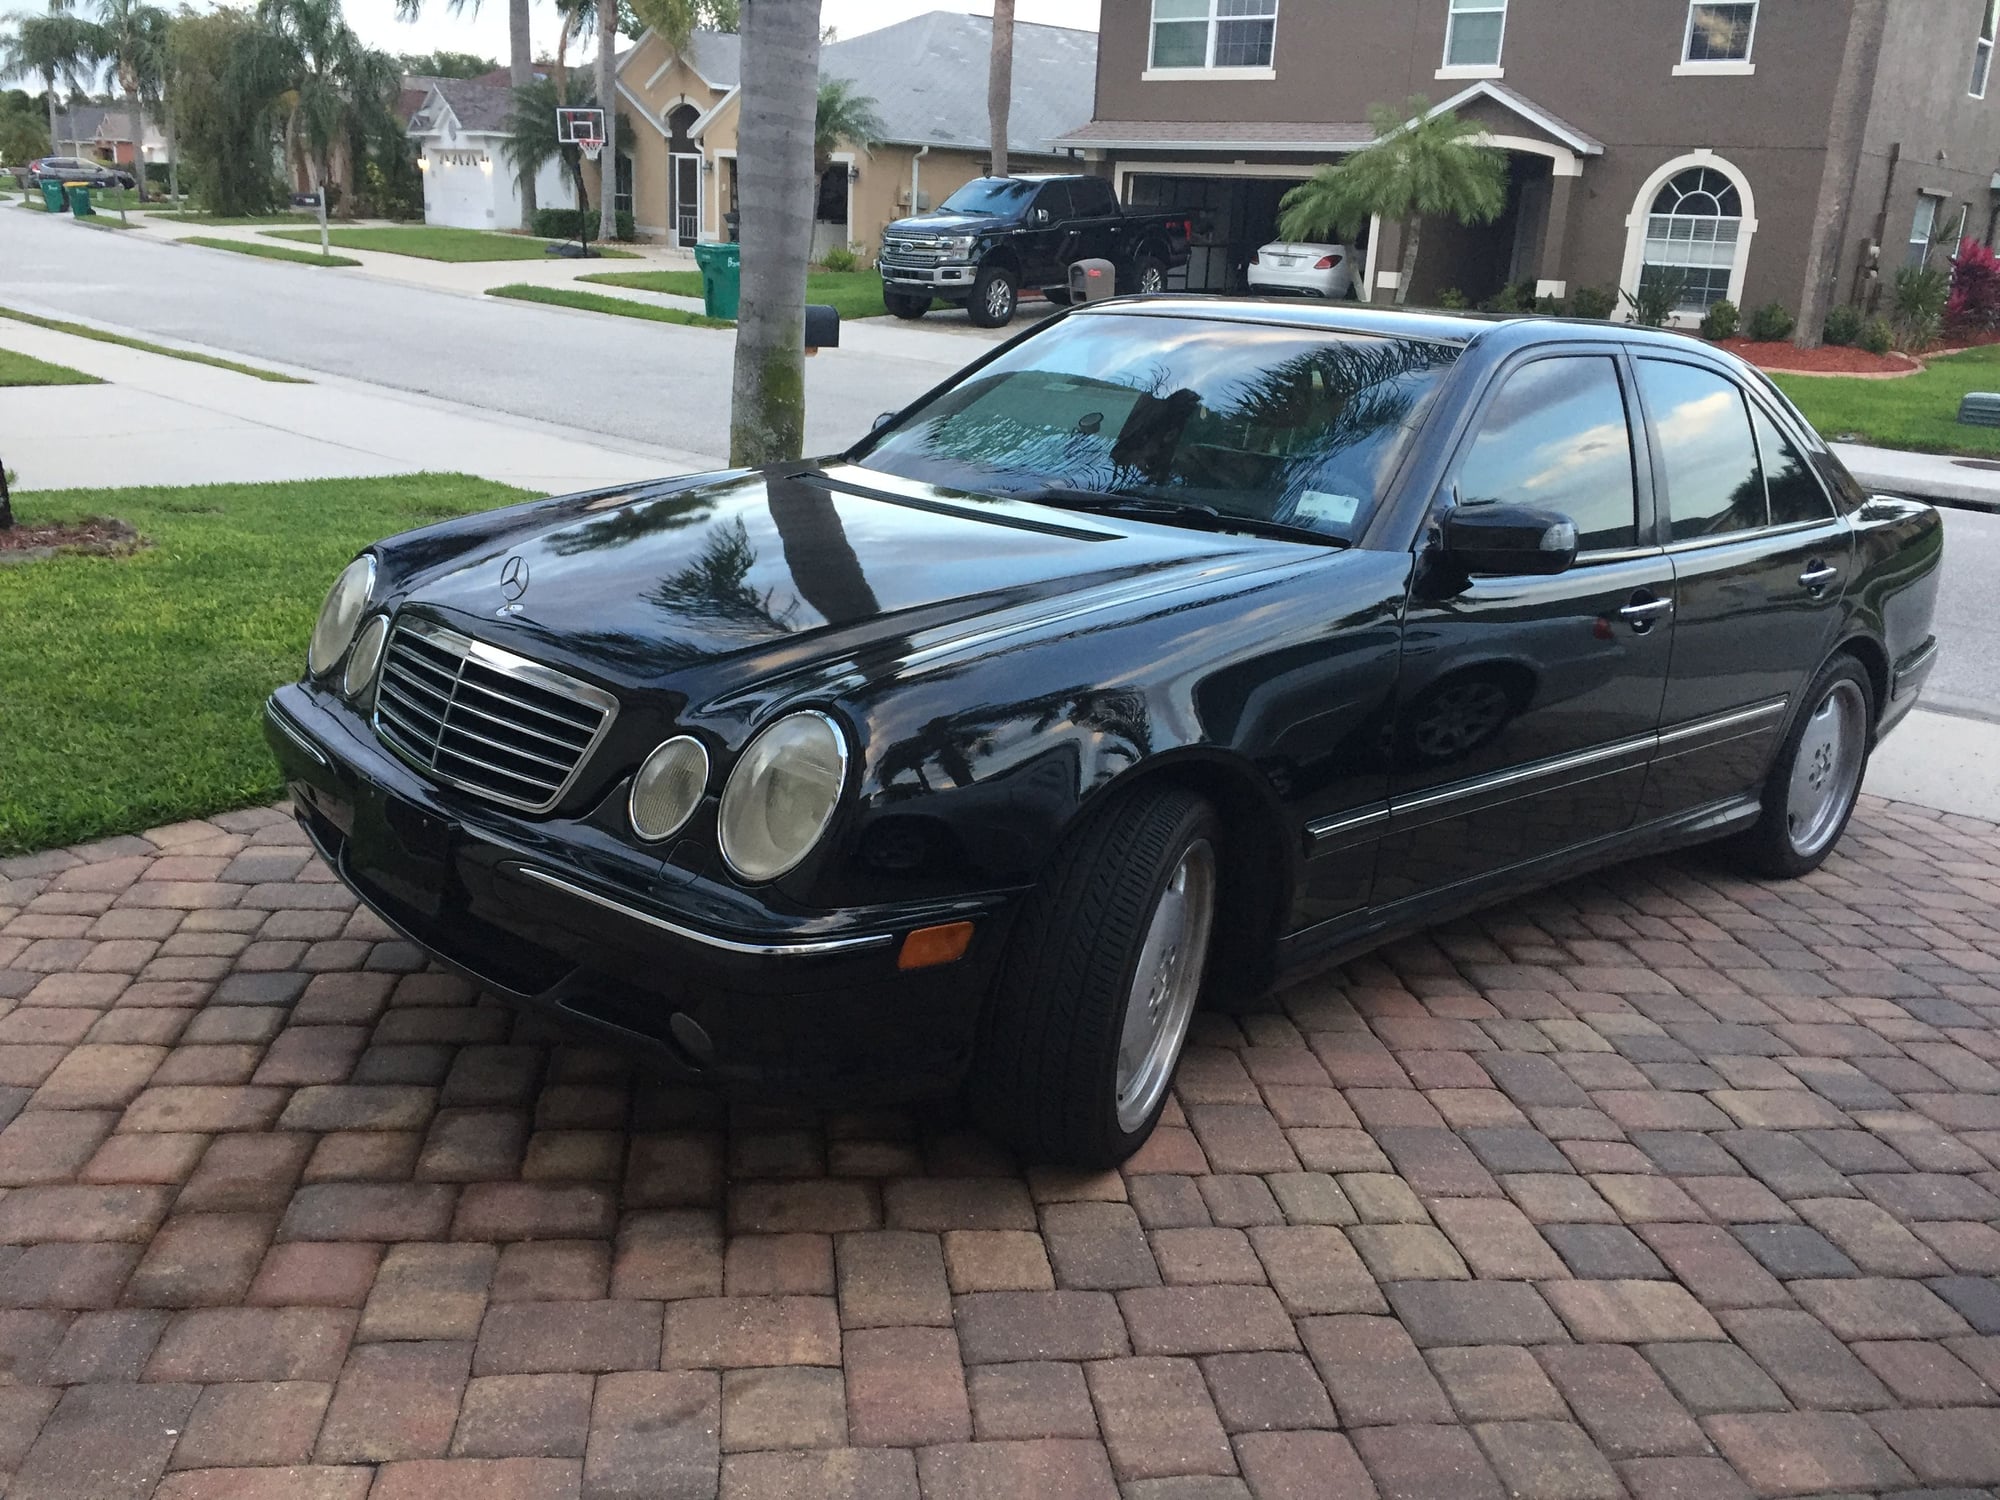 2001 Mercedes-Benz E55 AMG - 2001 E55 with extensive service history - Used - VIN WDBJF74J91B179514 - 172,000 Miles - 8 cyl - 2WD - Automatic - Sedan - Black - Melbourne, FL 32901, United States